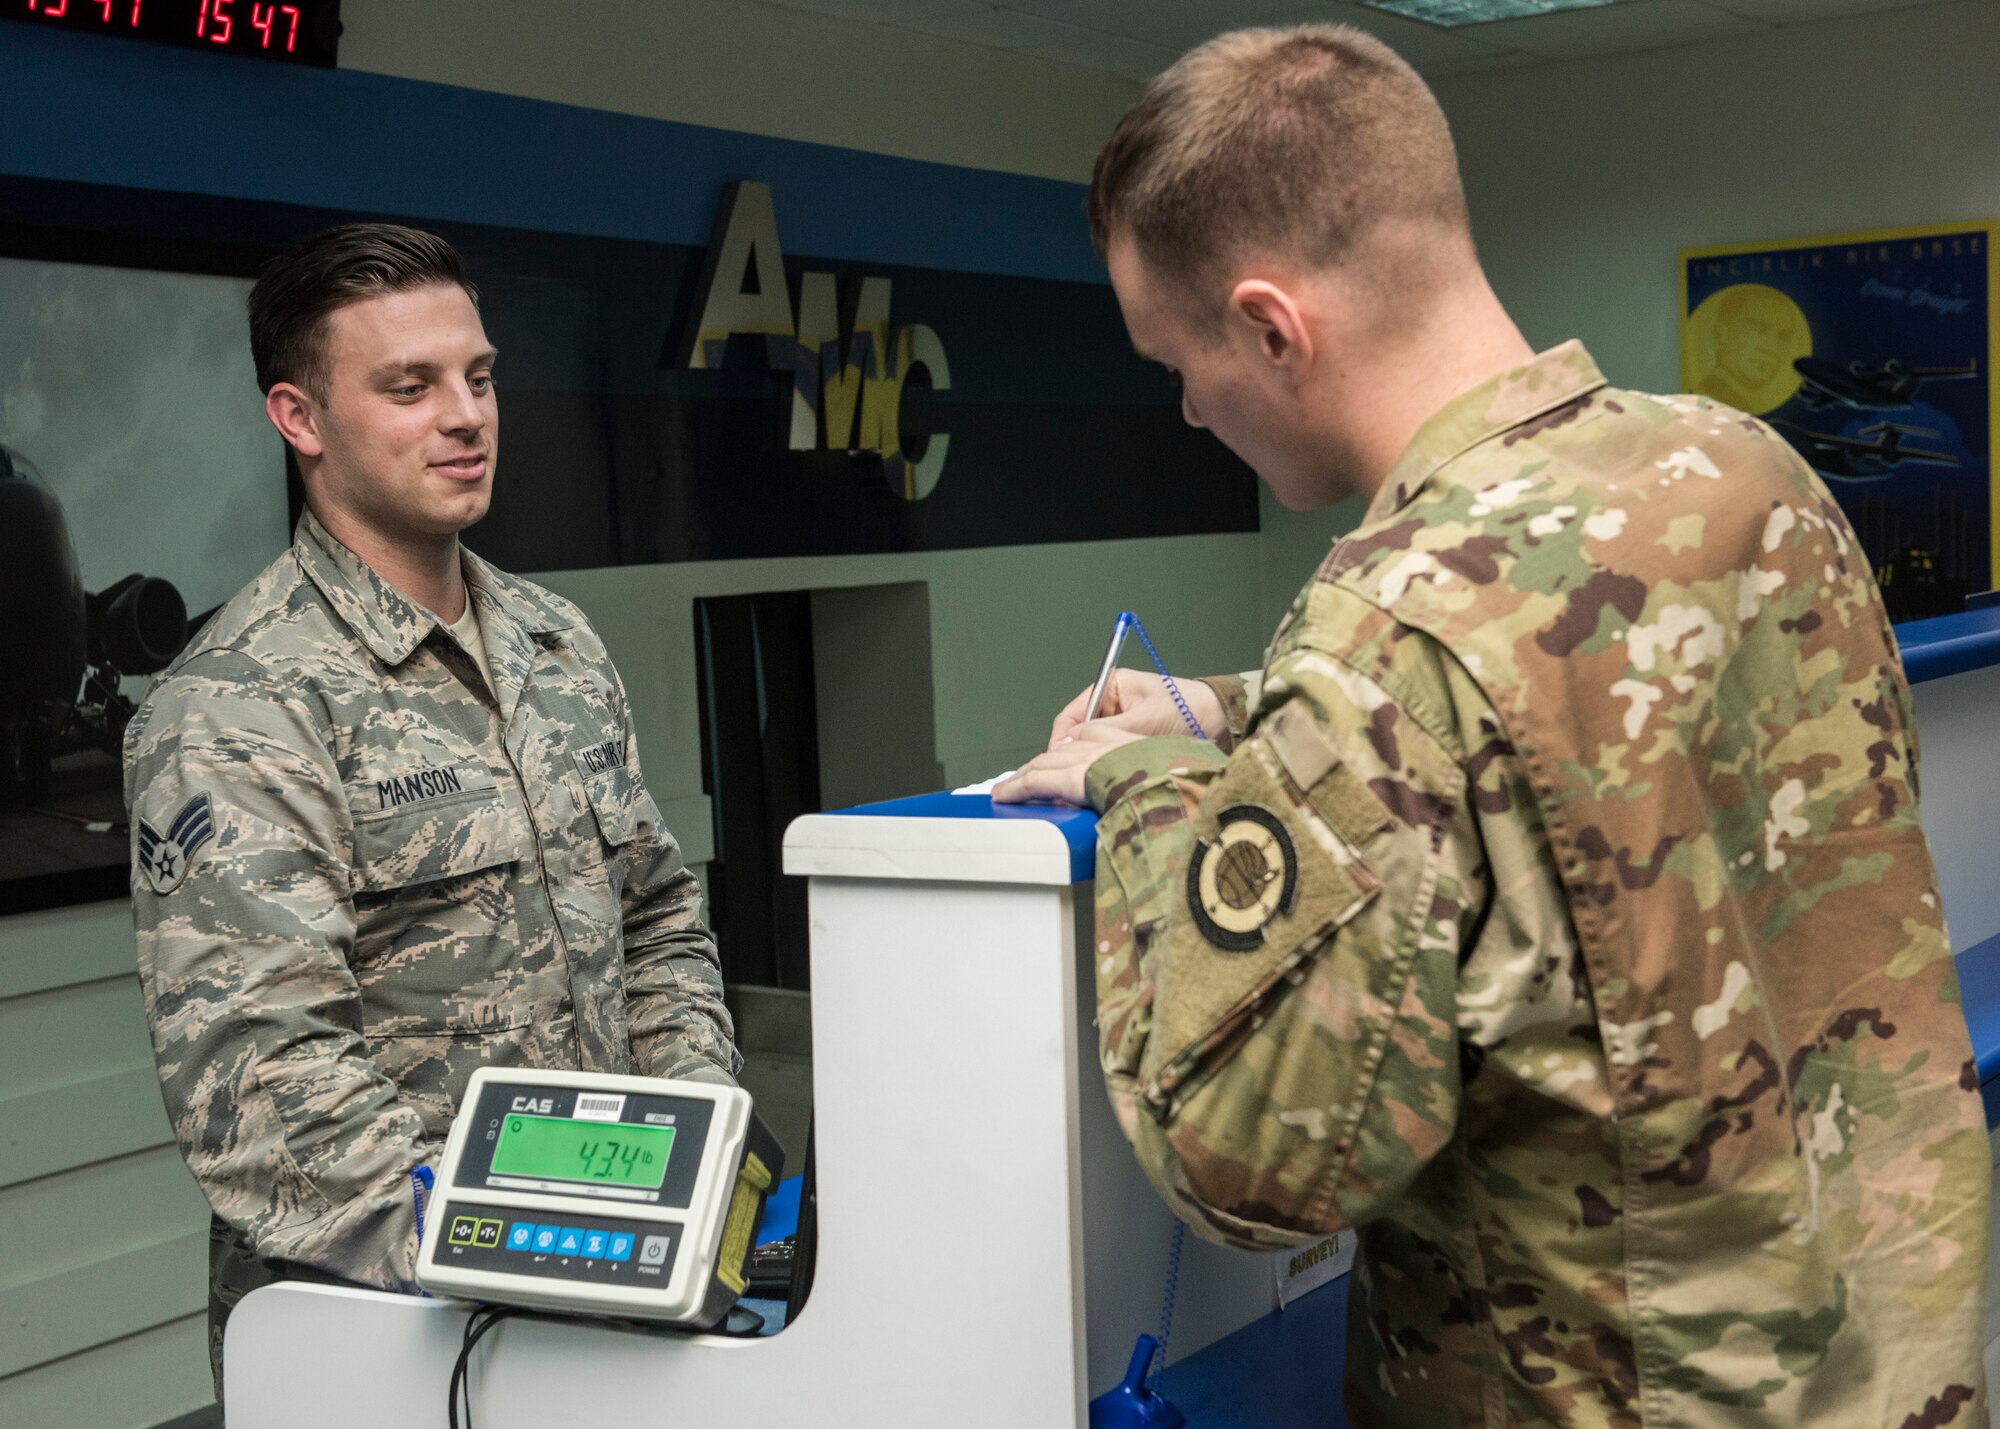 Senior Airman Cameron Manson, 728 Air Mobility Squadron passenger service representative, checks in an Airmen April 16, 2019, at Incirlik Air Base, Turkey. Manson is responsible for ensuring all passengers and luggage are loaded safely and efficiently on to the aircraft. (U.S. Air Force photo by Staff Sgt. Kirby Turbak)